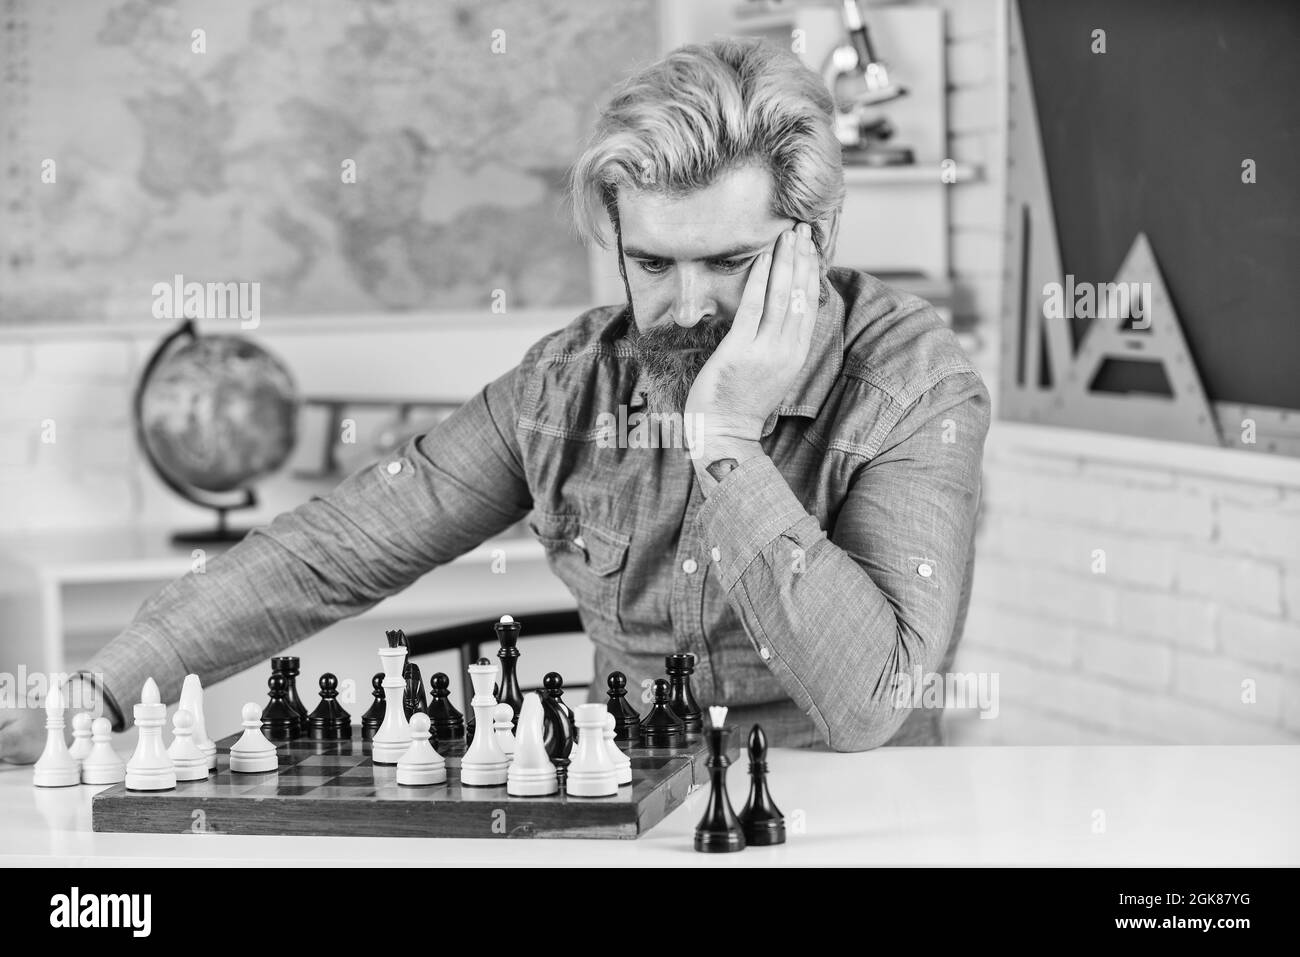 Development logics. Chess is life in miniature. Chess lesson. Strategy concept. School teacher. Board game. Playing chess. Intellectual hobby. Figures Stock Photo